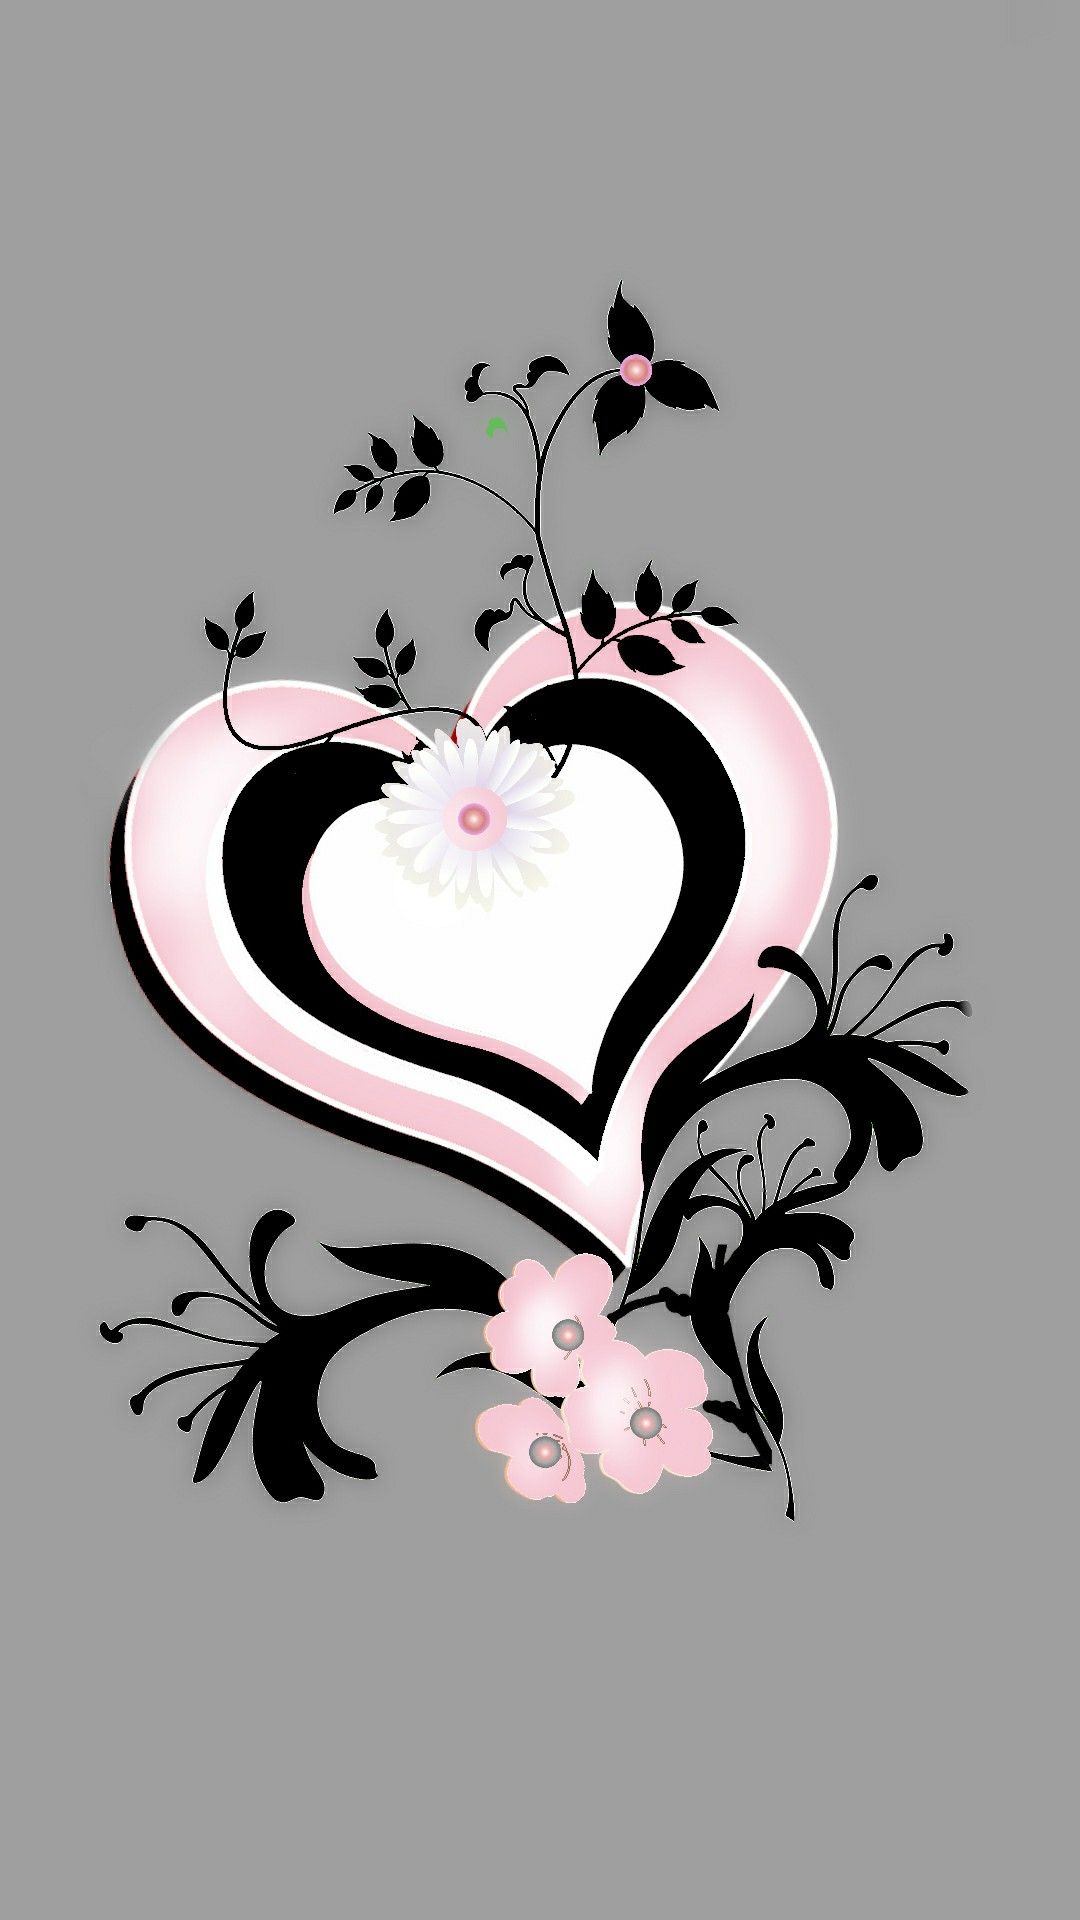 Pink Blk W White Heart S Of Love In